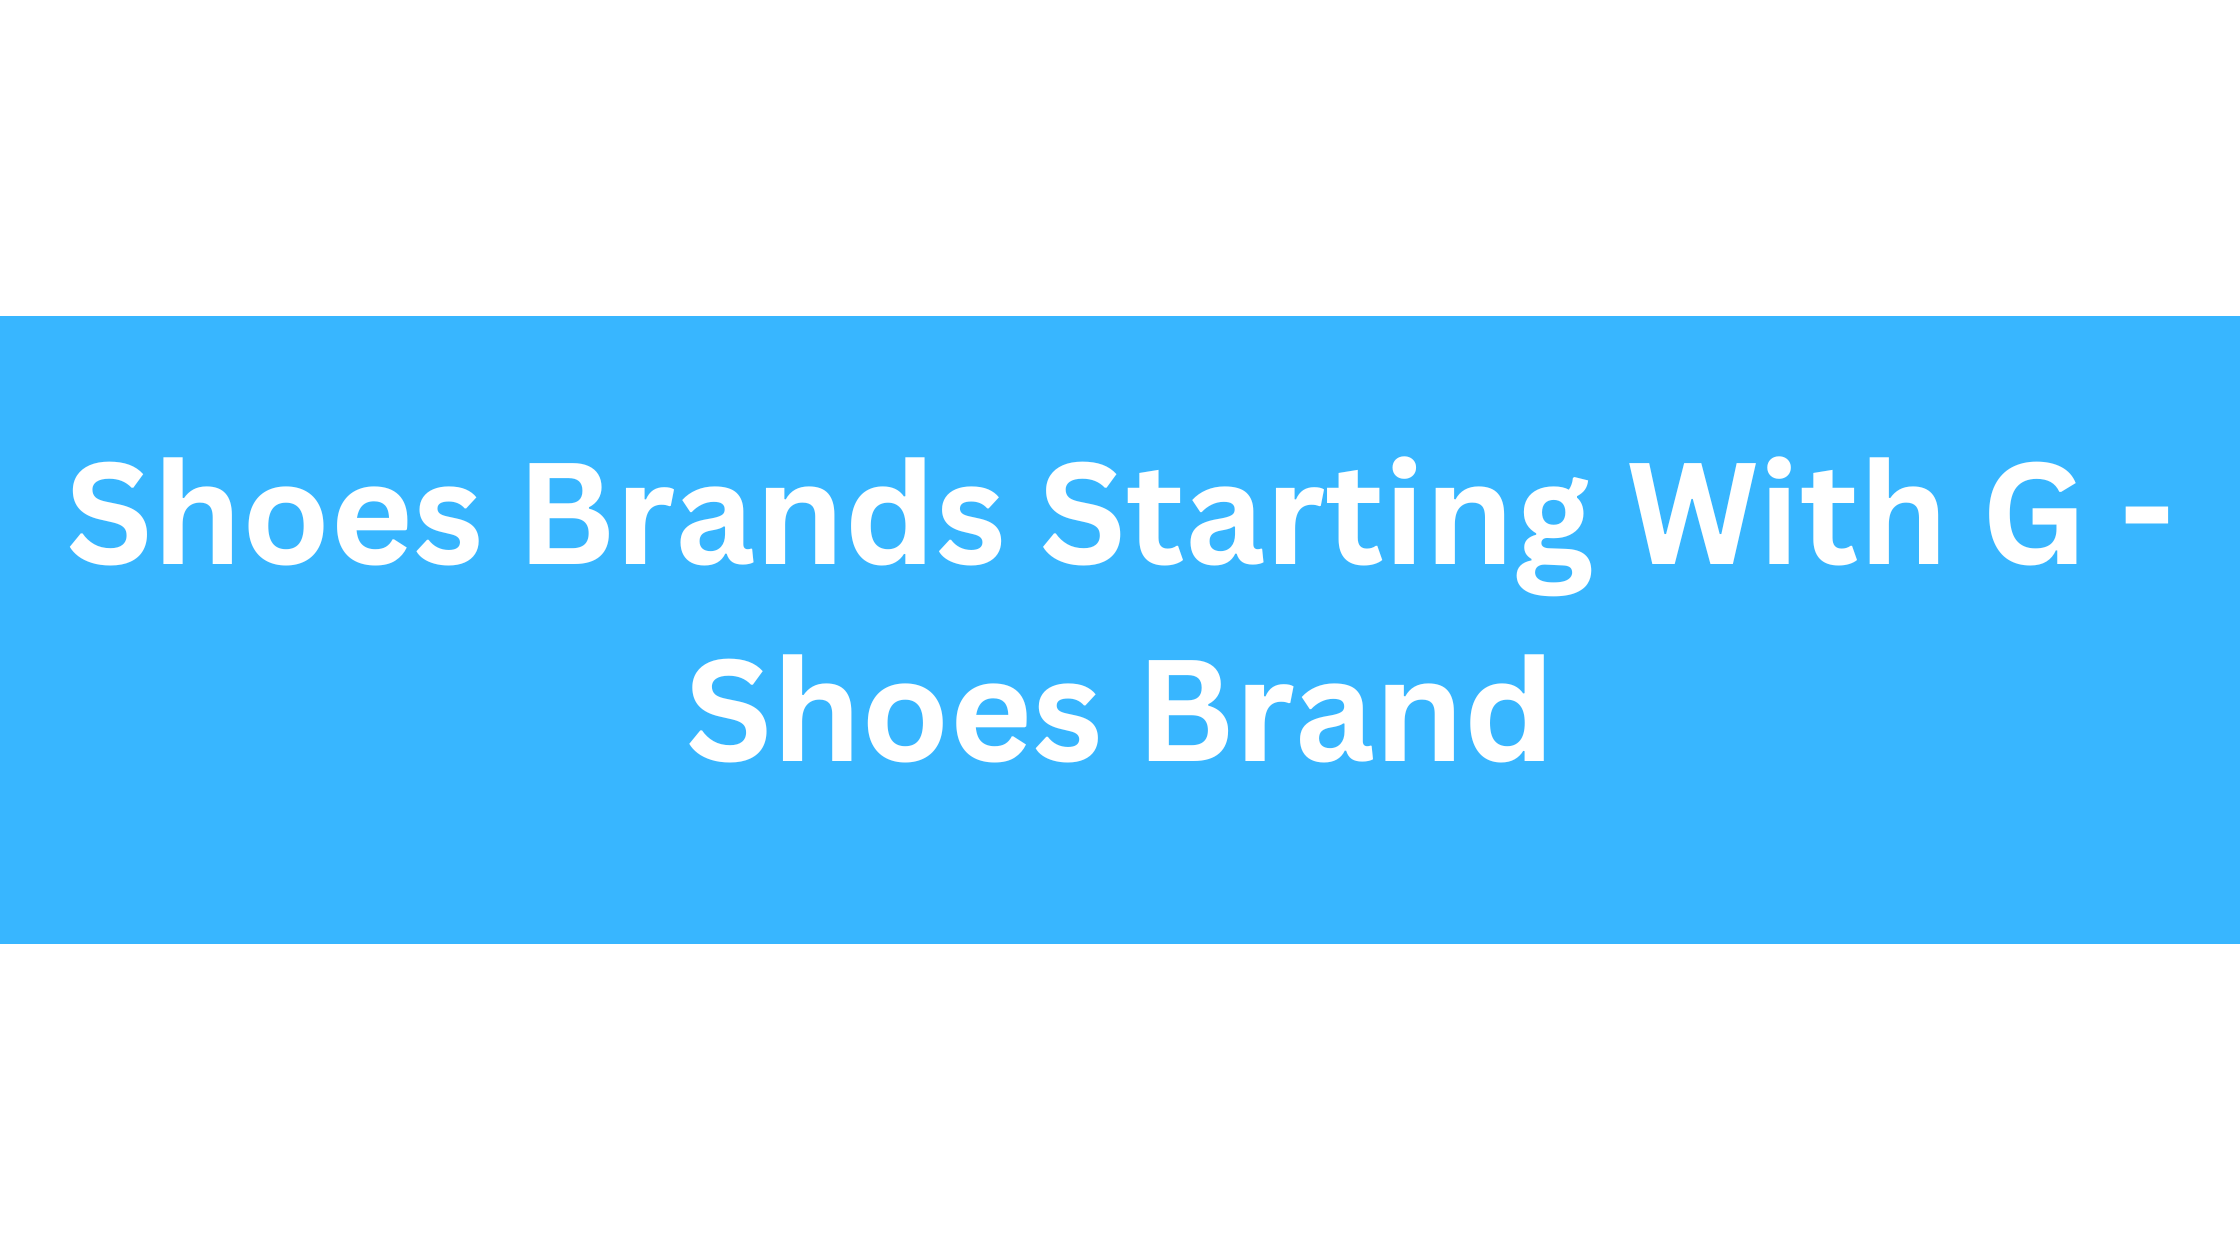 Shoes Brands Starting With G